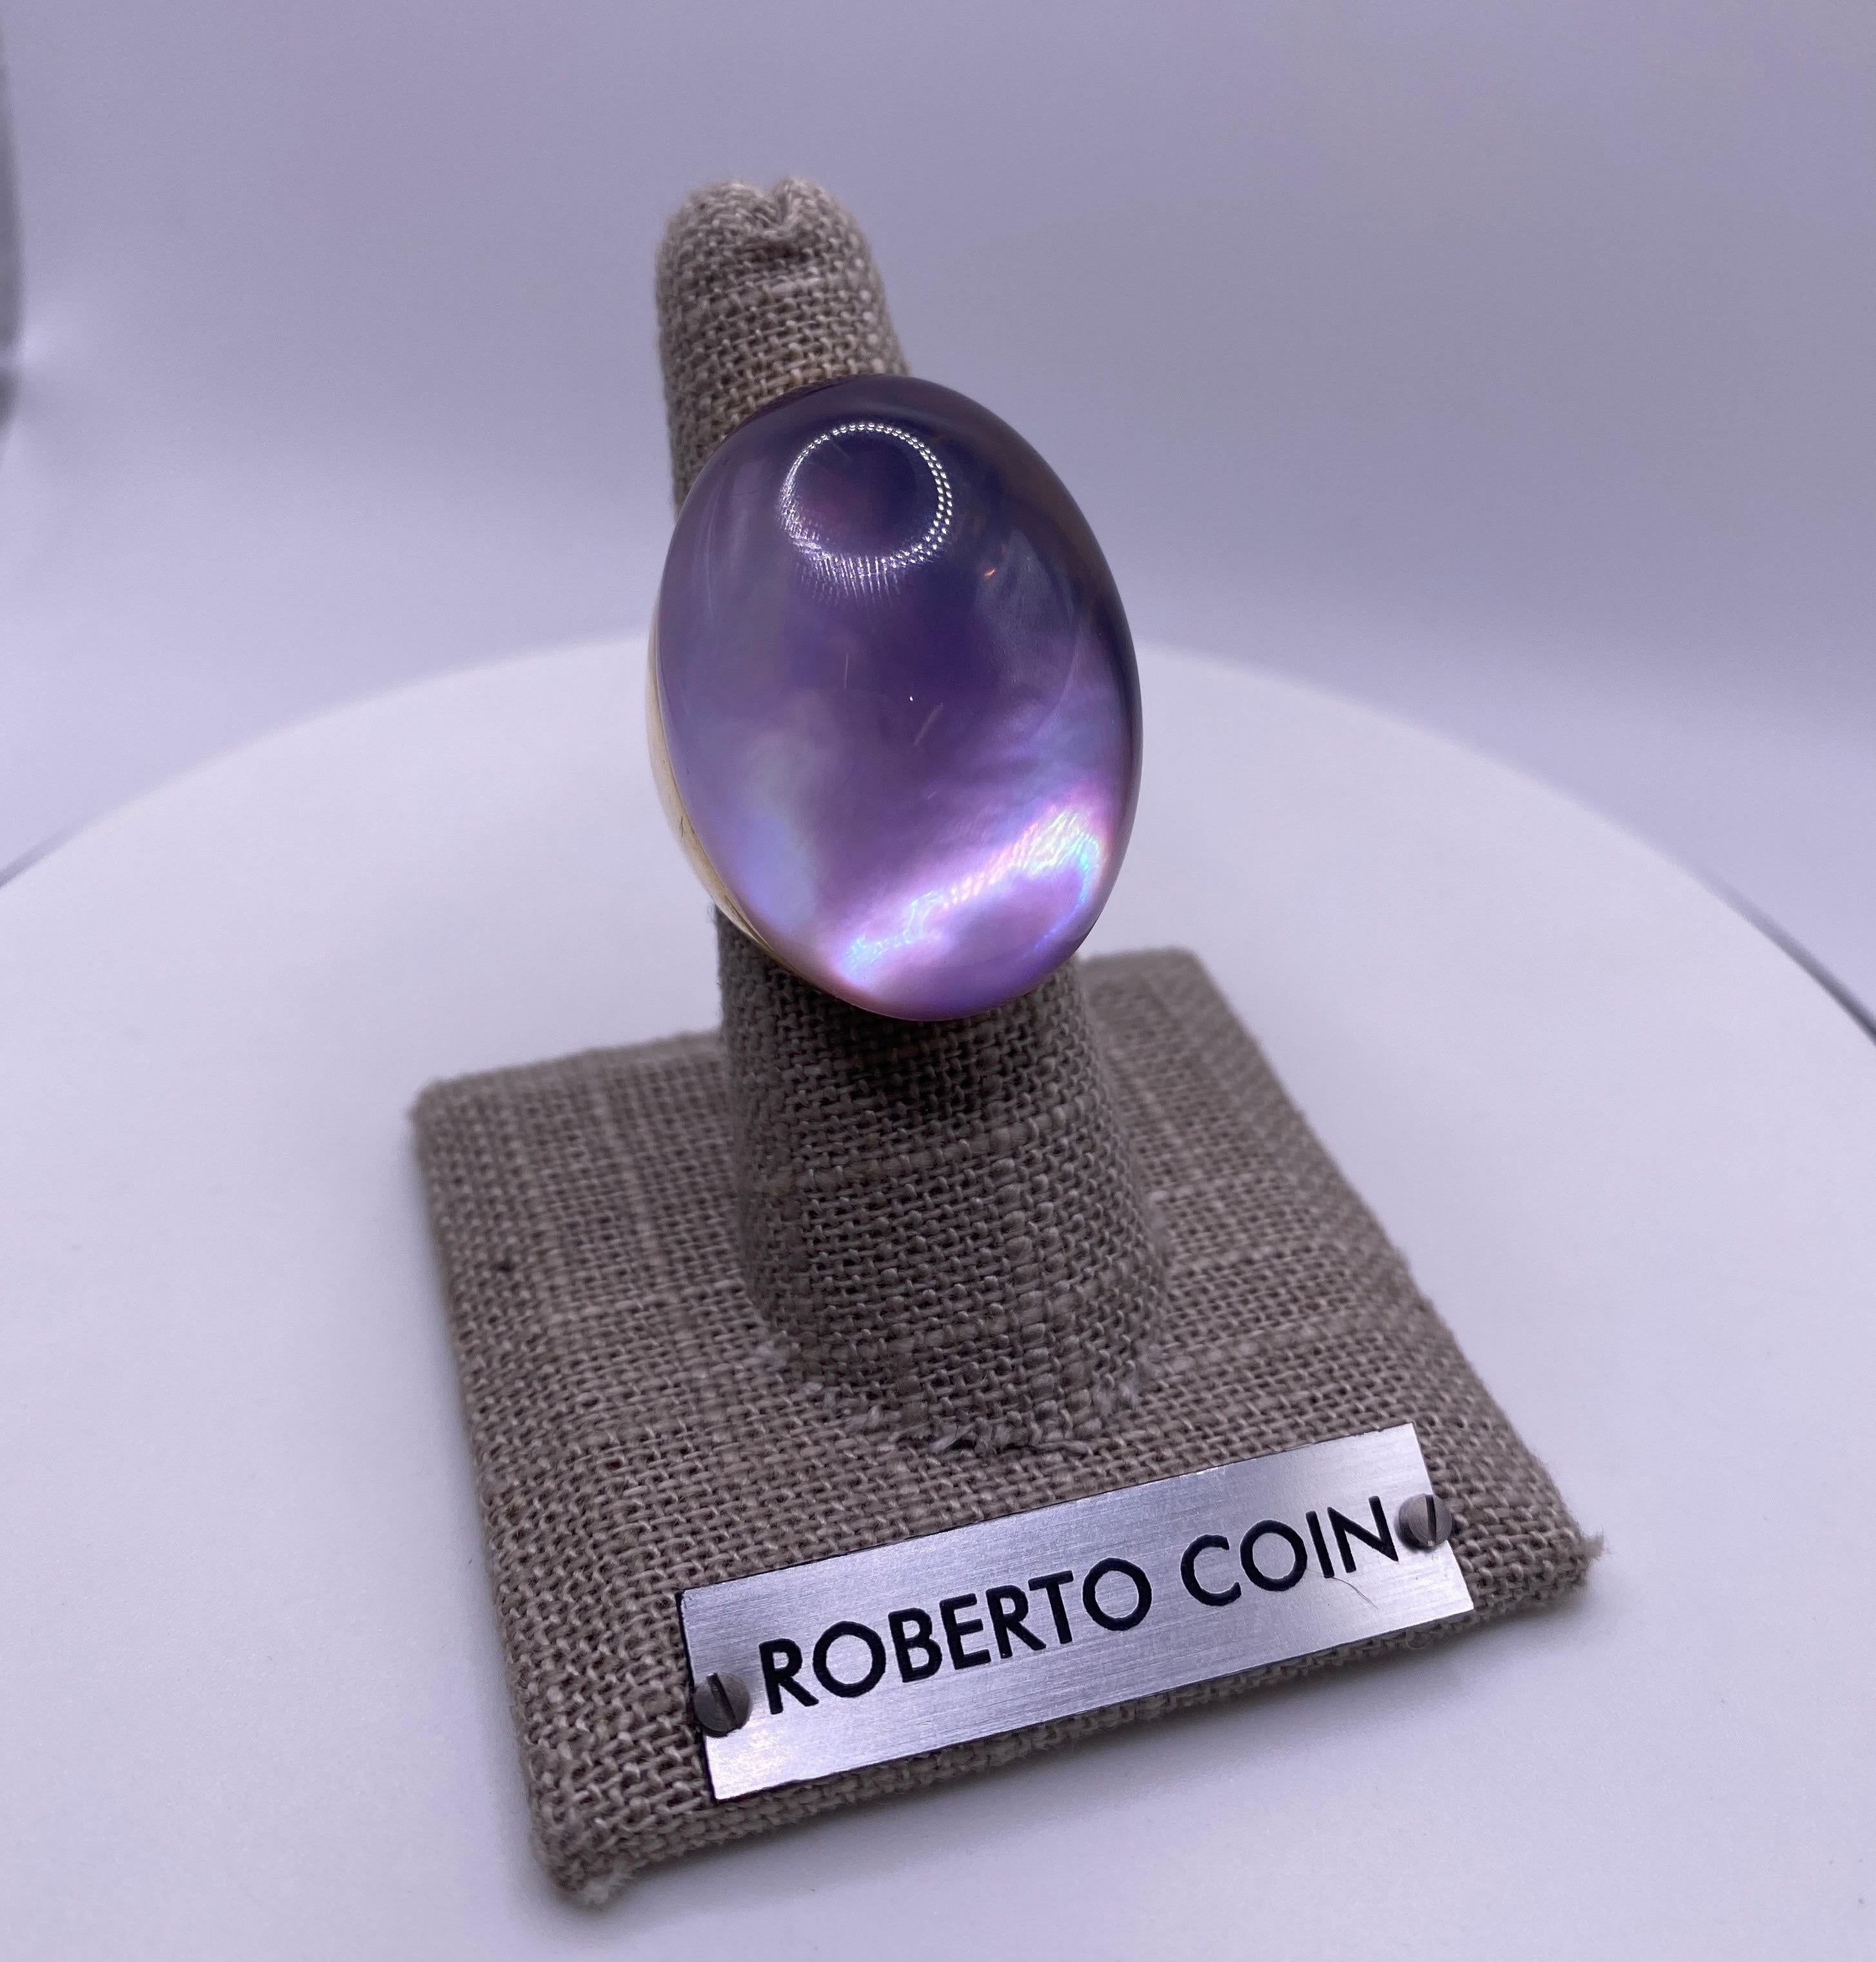 Roberto Coin Ring 18k yellow gold invisible set 24x33mm Amethyst w/ Mother of Pearl underlay. Hidden .02ct ruby and Roberto Coin mark on inside. Size 7